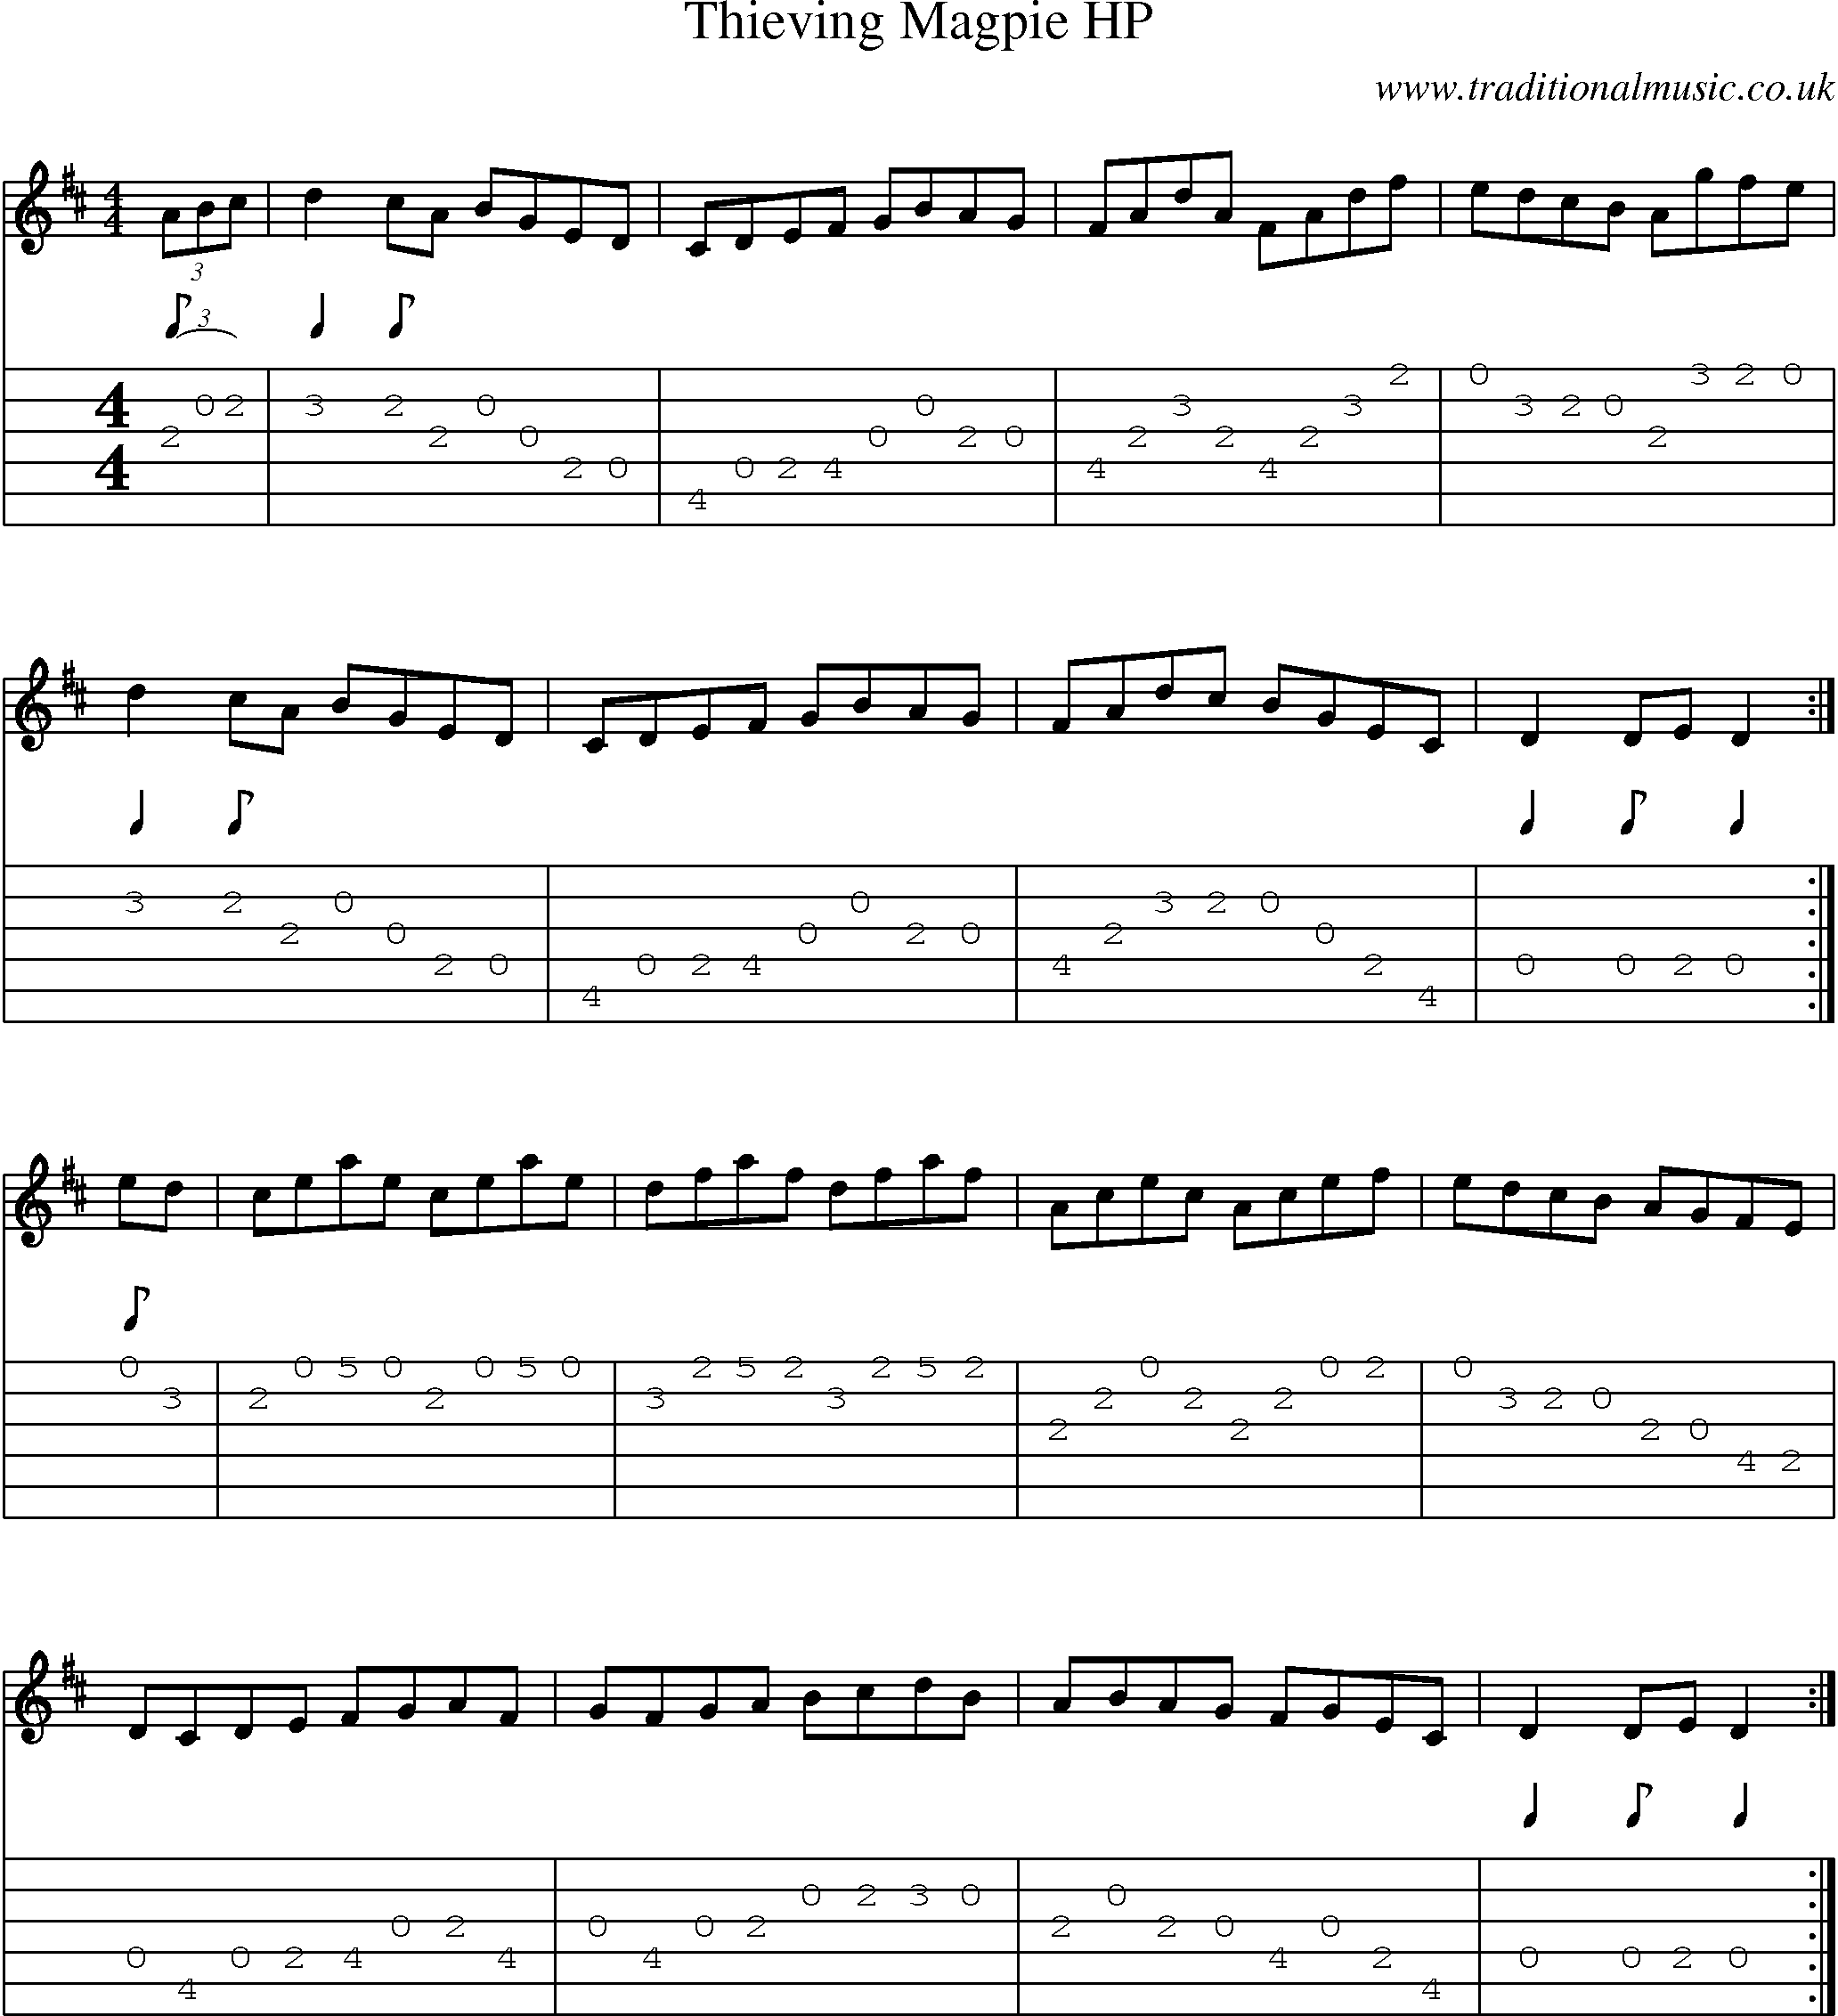 Music Score and Guitar Tabs for Thieving Magpie